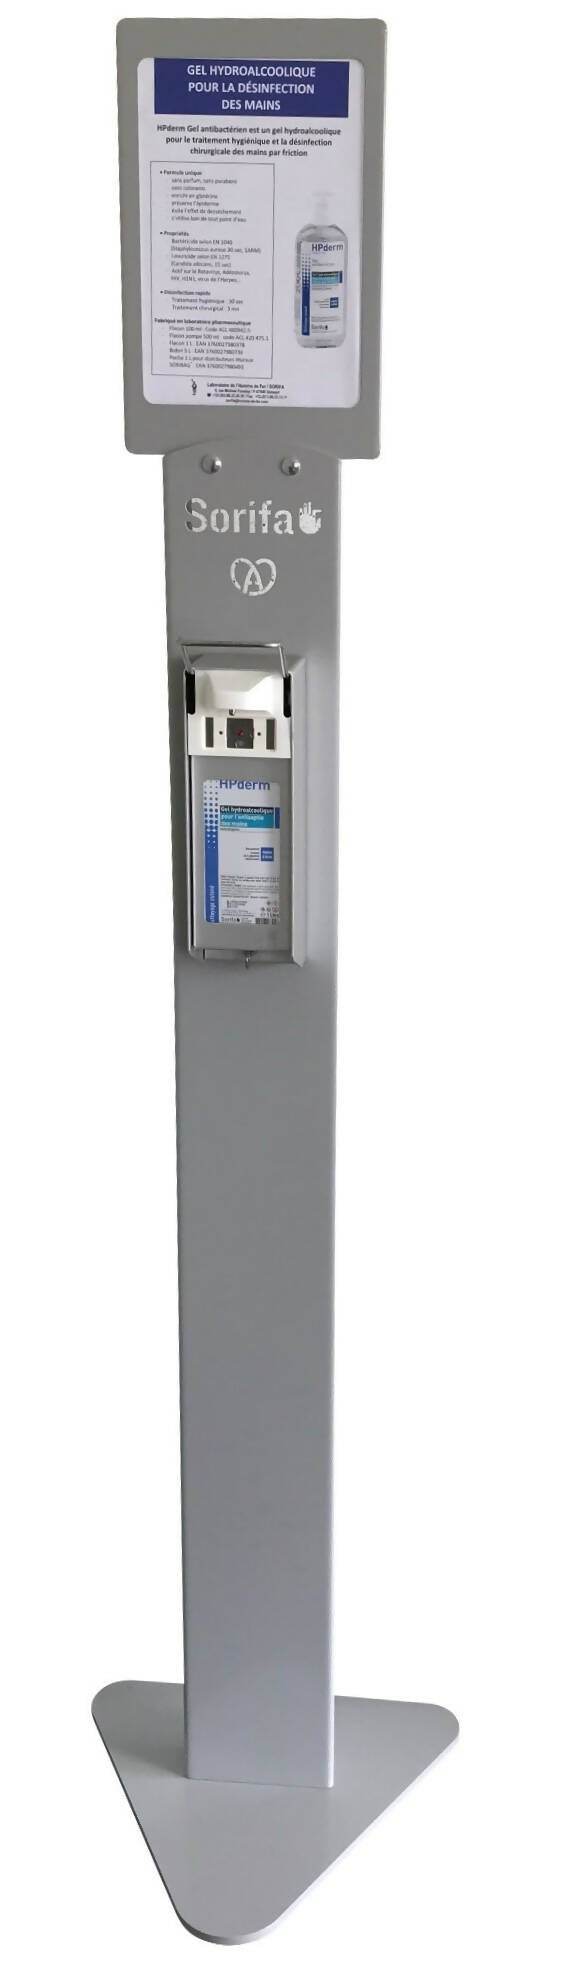 SORIFA - CONTACTLESS metal wall dispenser - Robust, ergonomic, lockable for 1L SORIFA brand bottle - For gels and liquid soaps.